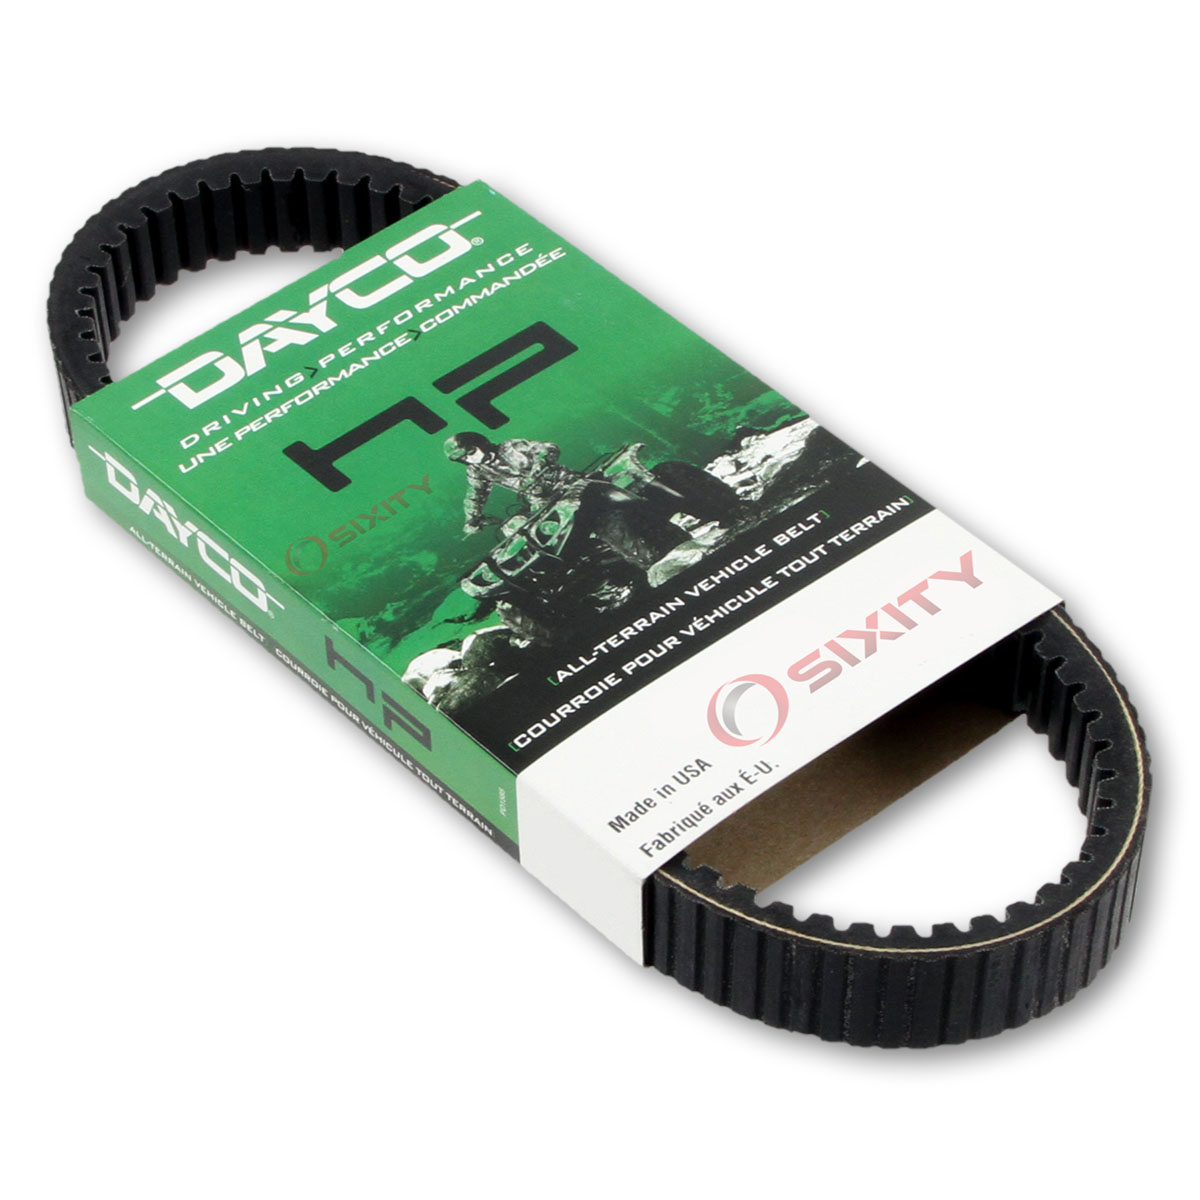 2017000065 Dayco HP Drive Belt for 2002-2006 Arctic Cat 500 4 sku 2017000065